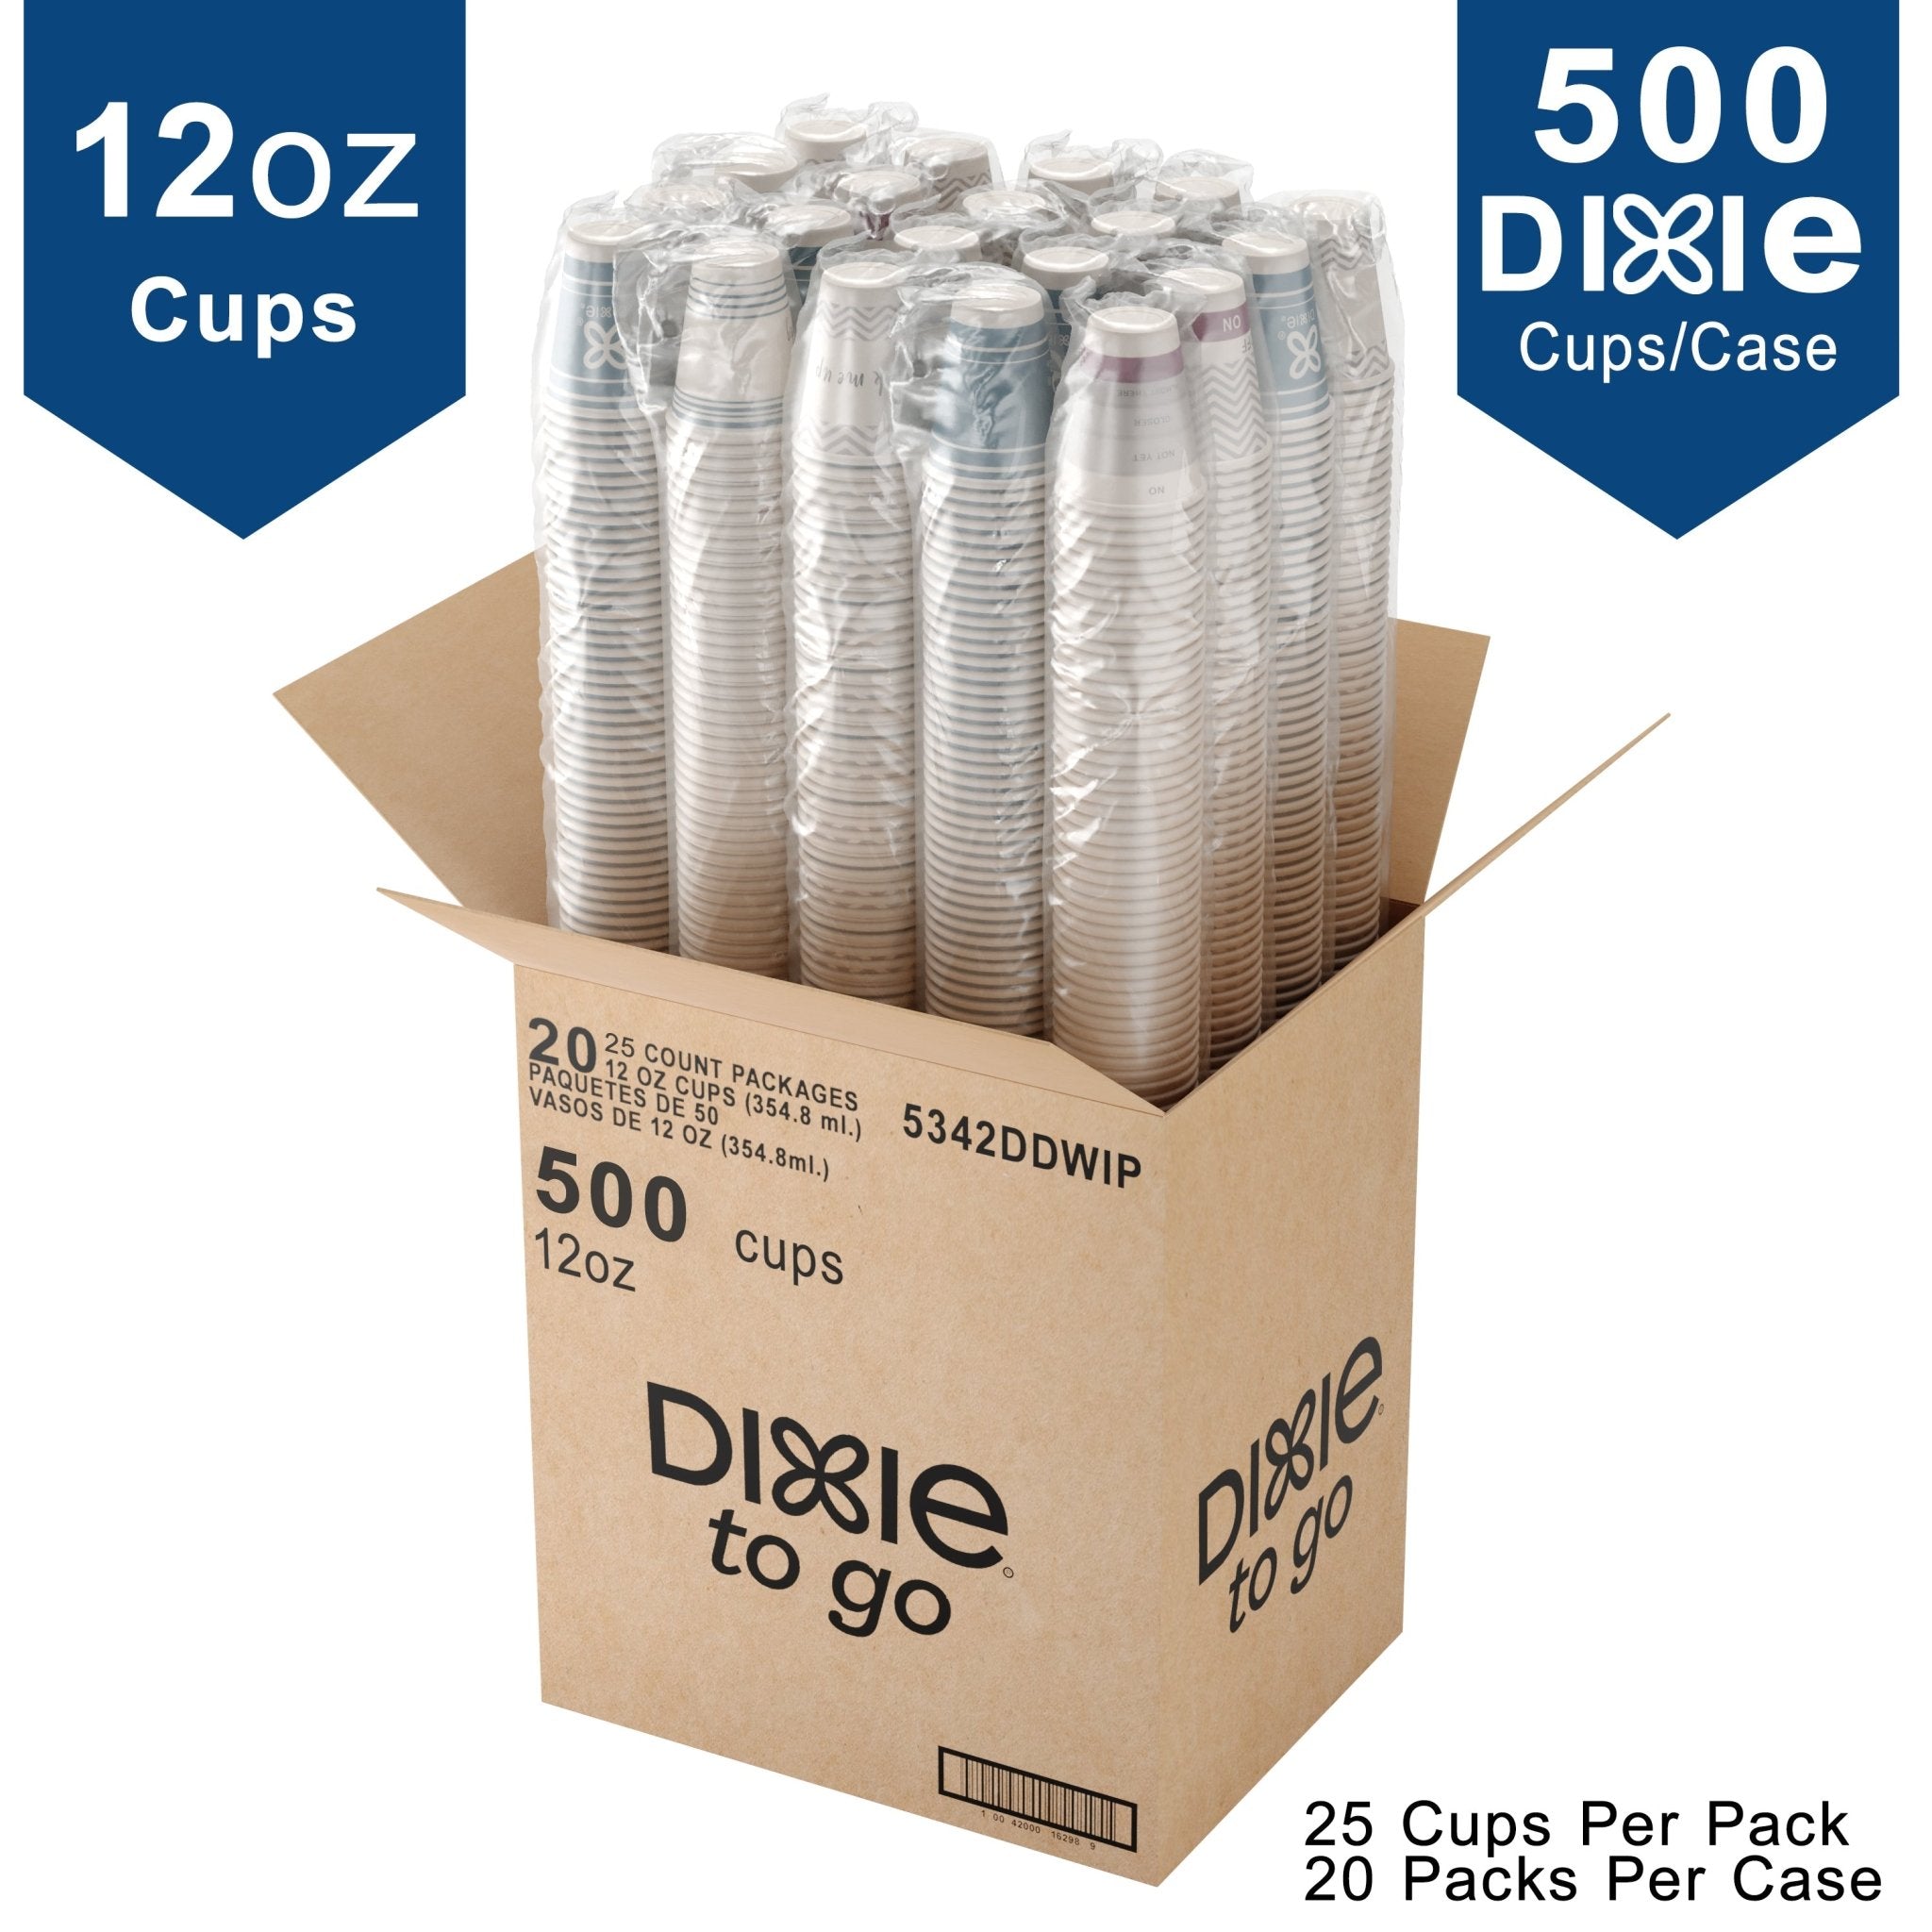 12 Oz. Dixie to go Paper Cups | 500 Count